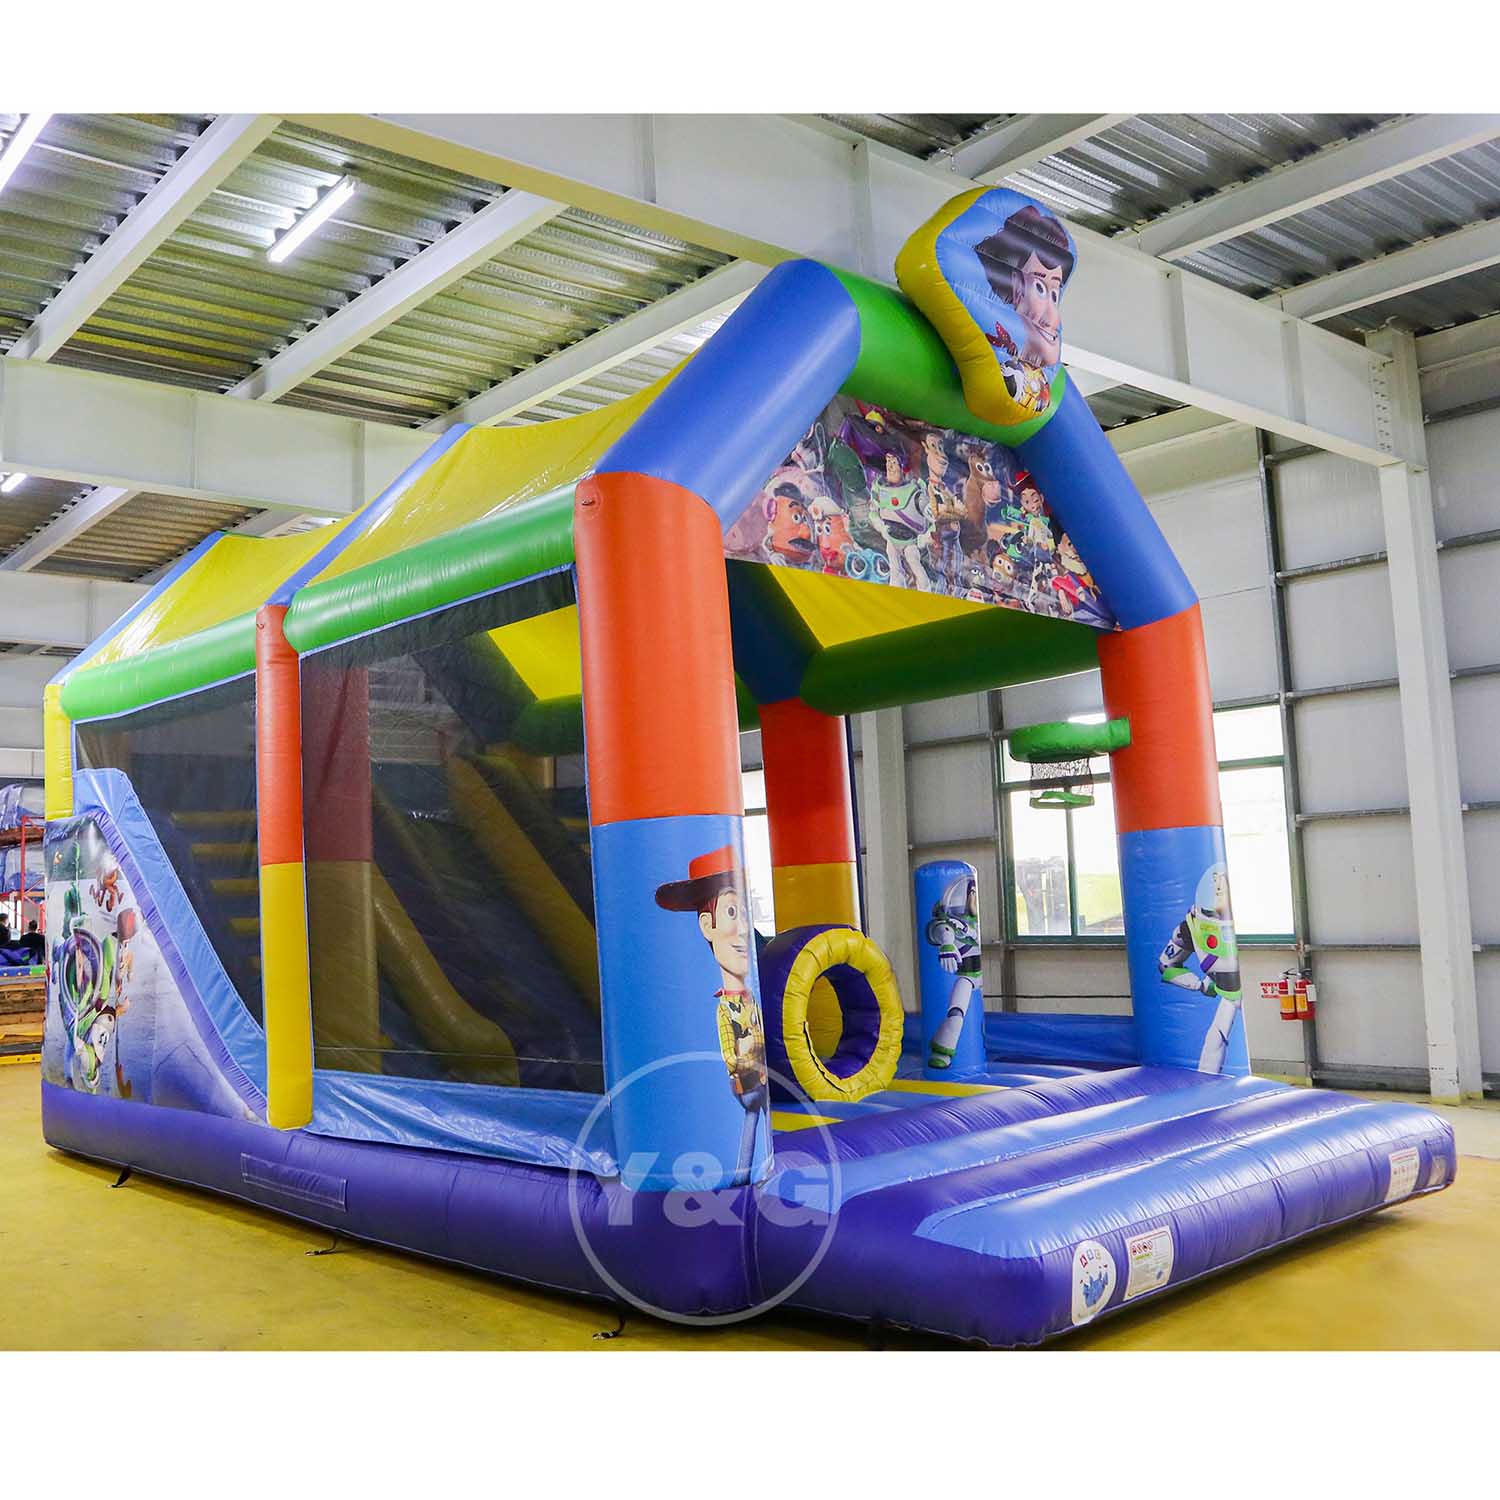 Toy Story Inflatable Bounce HouseYG-156